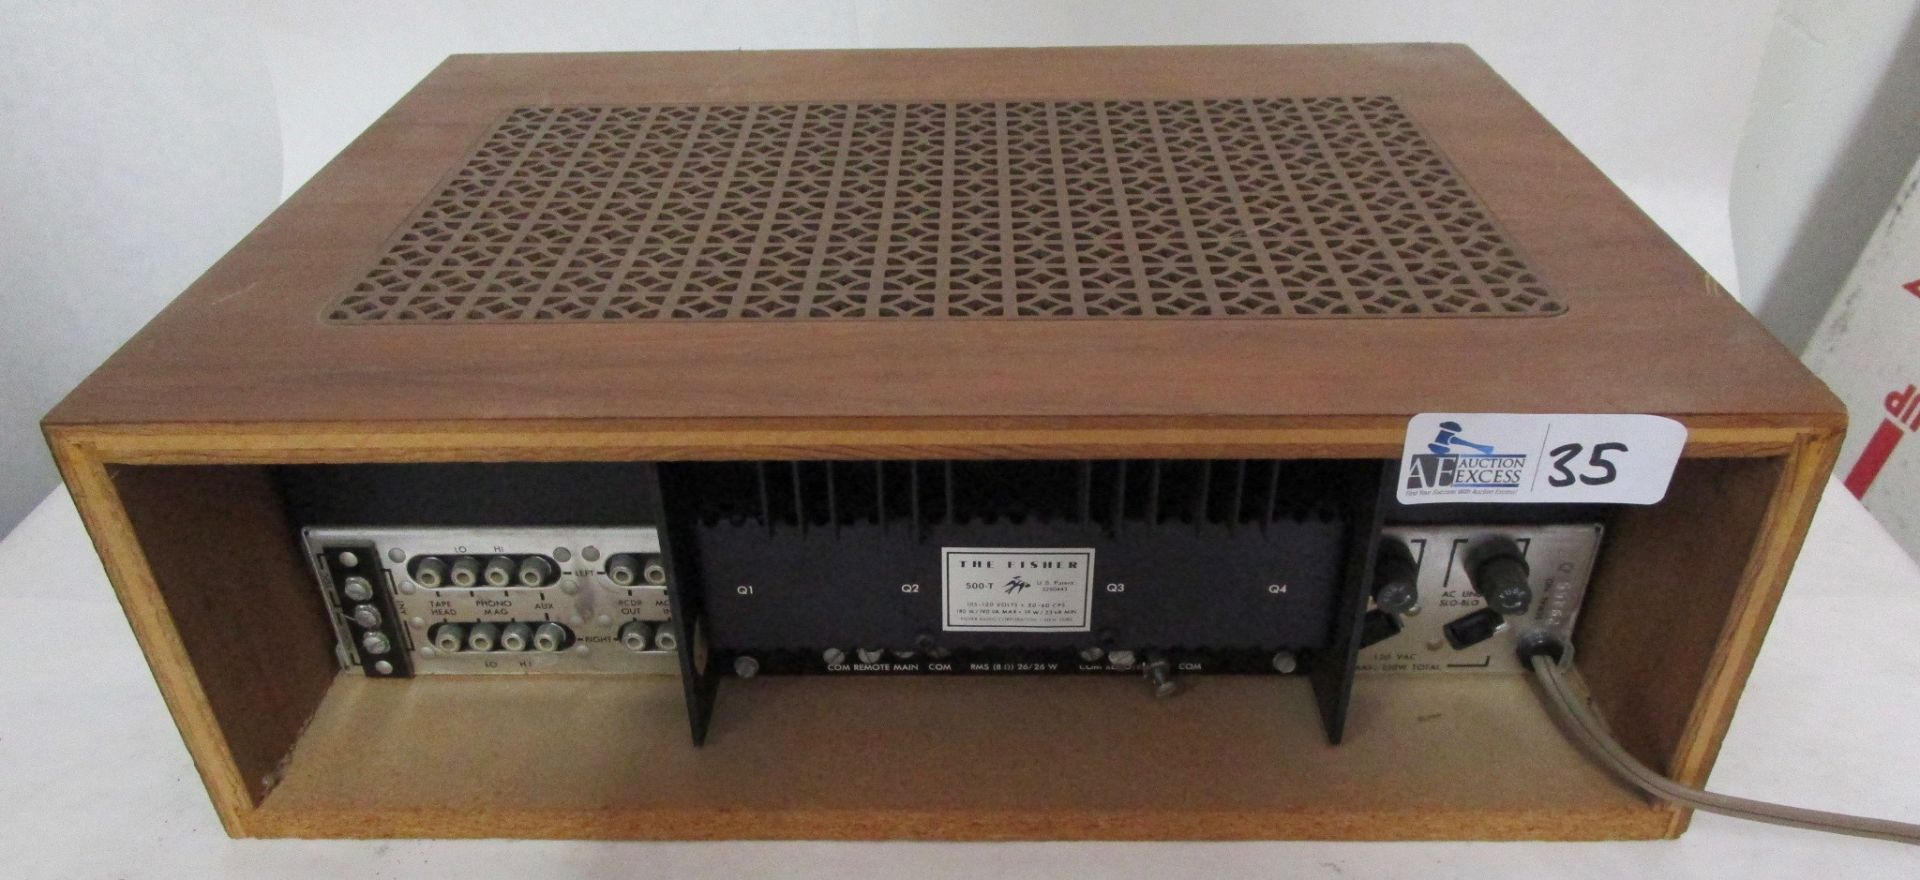 THE FISHER TRANSISTOR SERIES 500T RECEIVER - Image 2 of 2